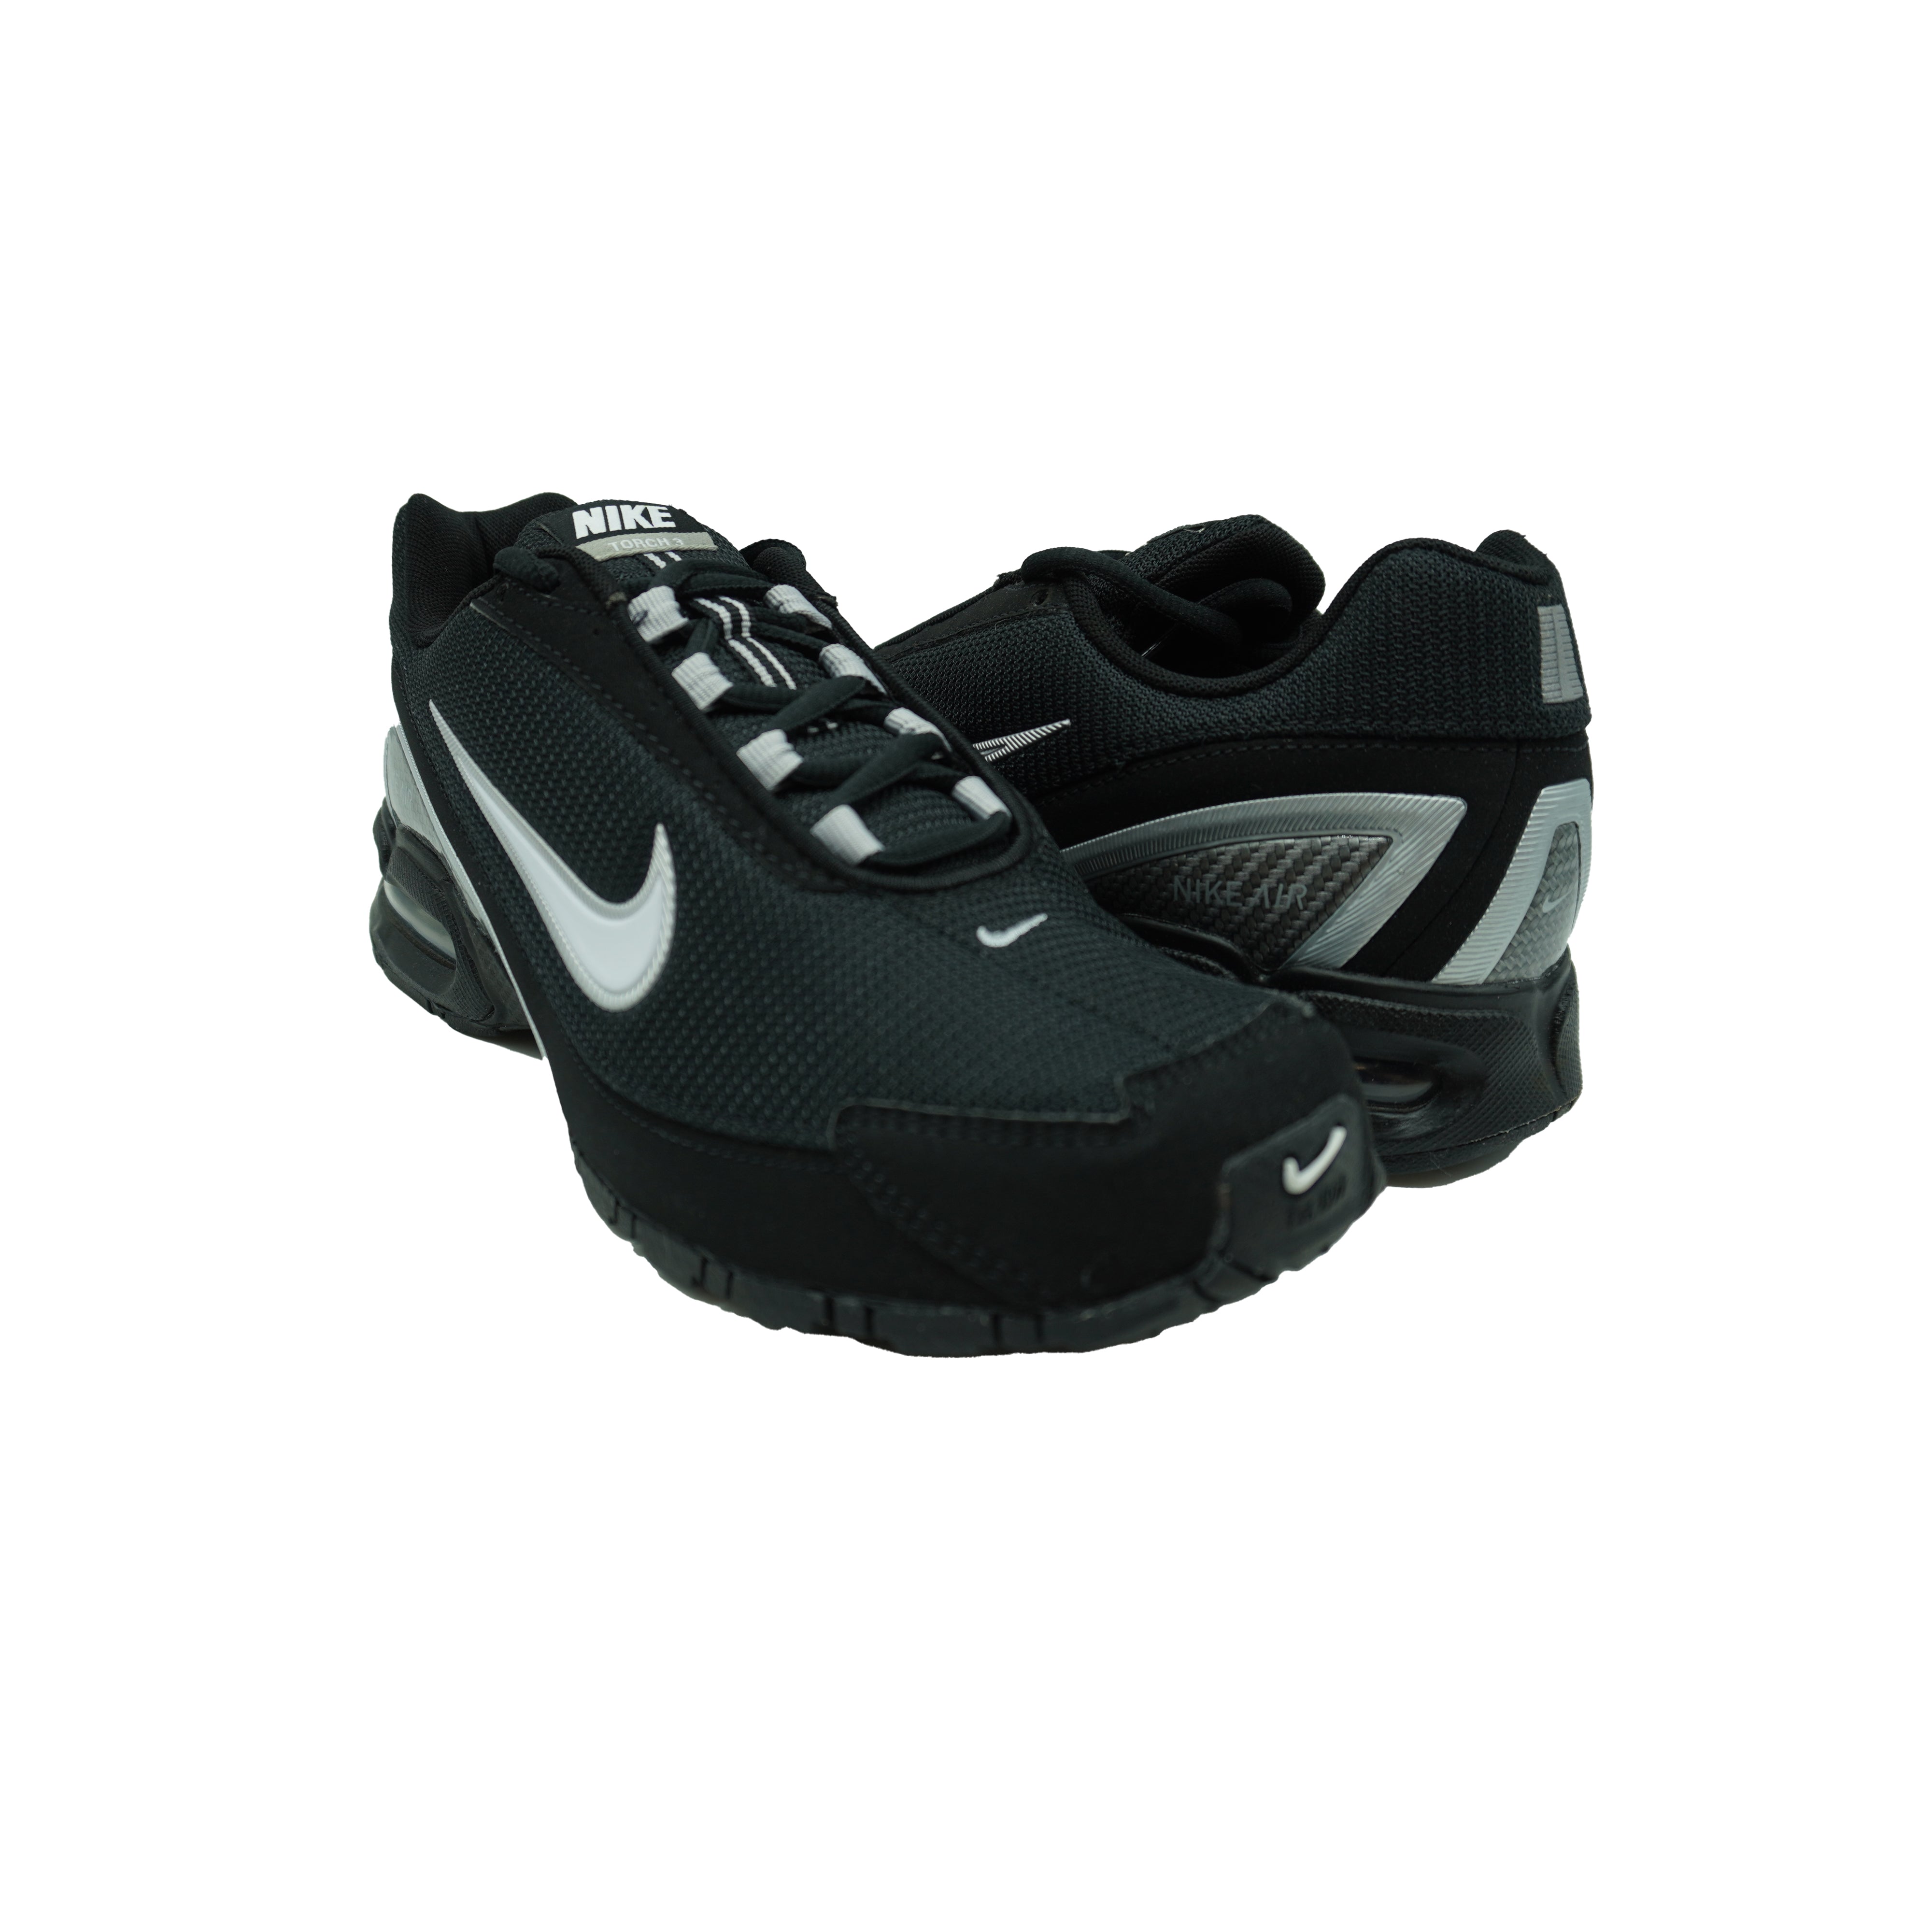 Nike Men's Air Max 3 Running Athletic Shoes Black Silver Size 7. – The Uber Shop Retail Store